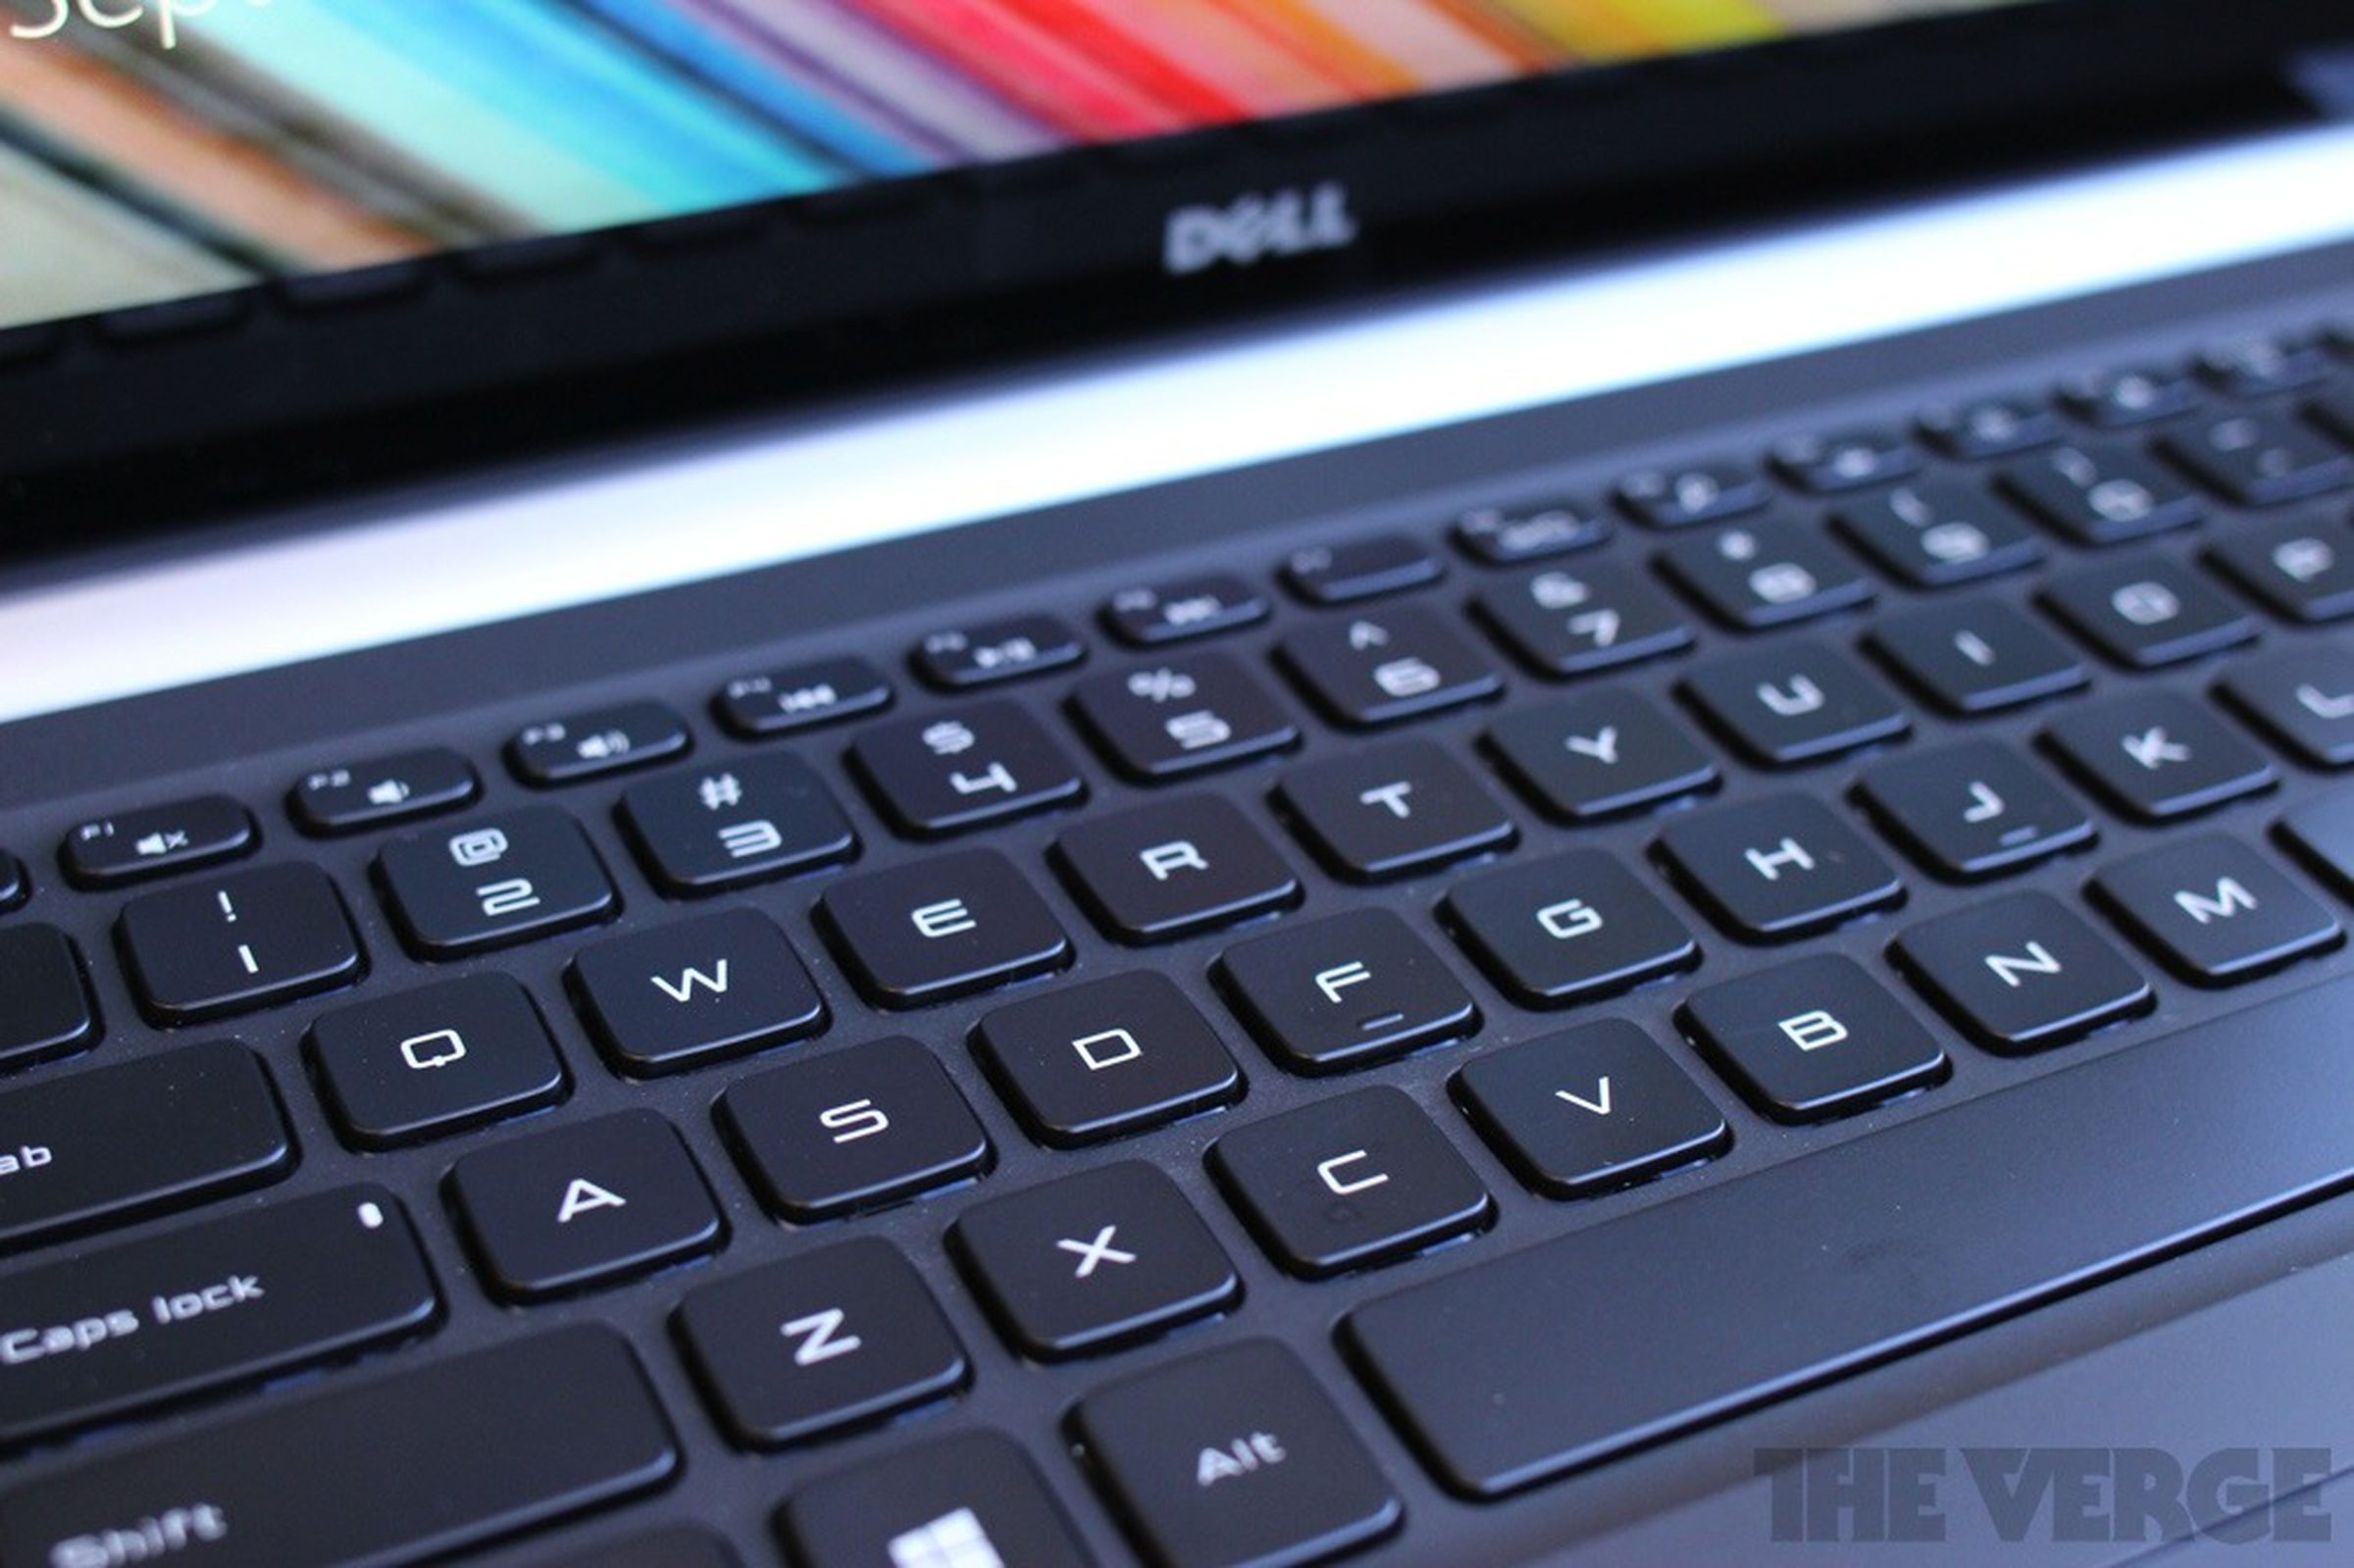 Dell XPS 15 (2013) hands-on pictures